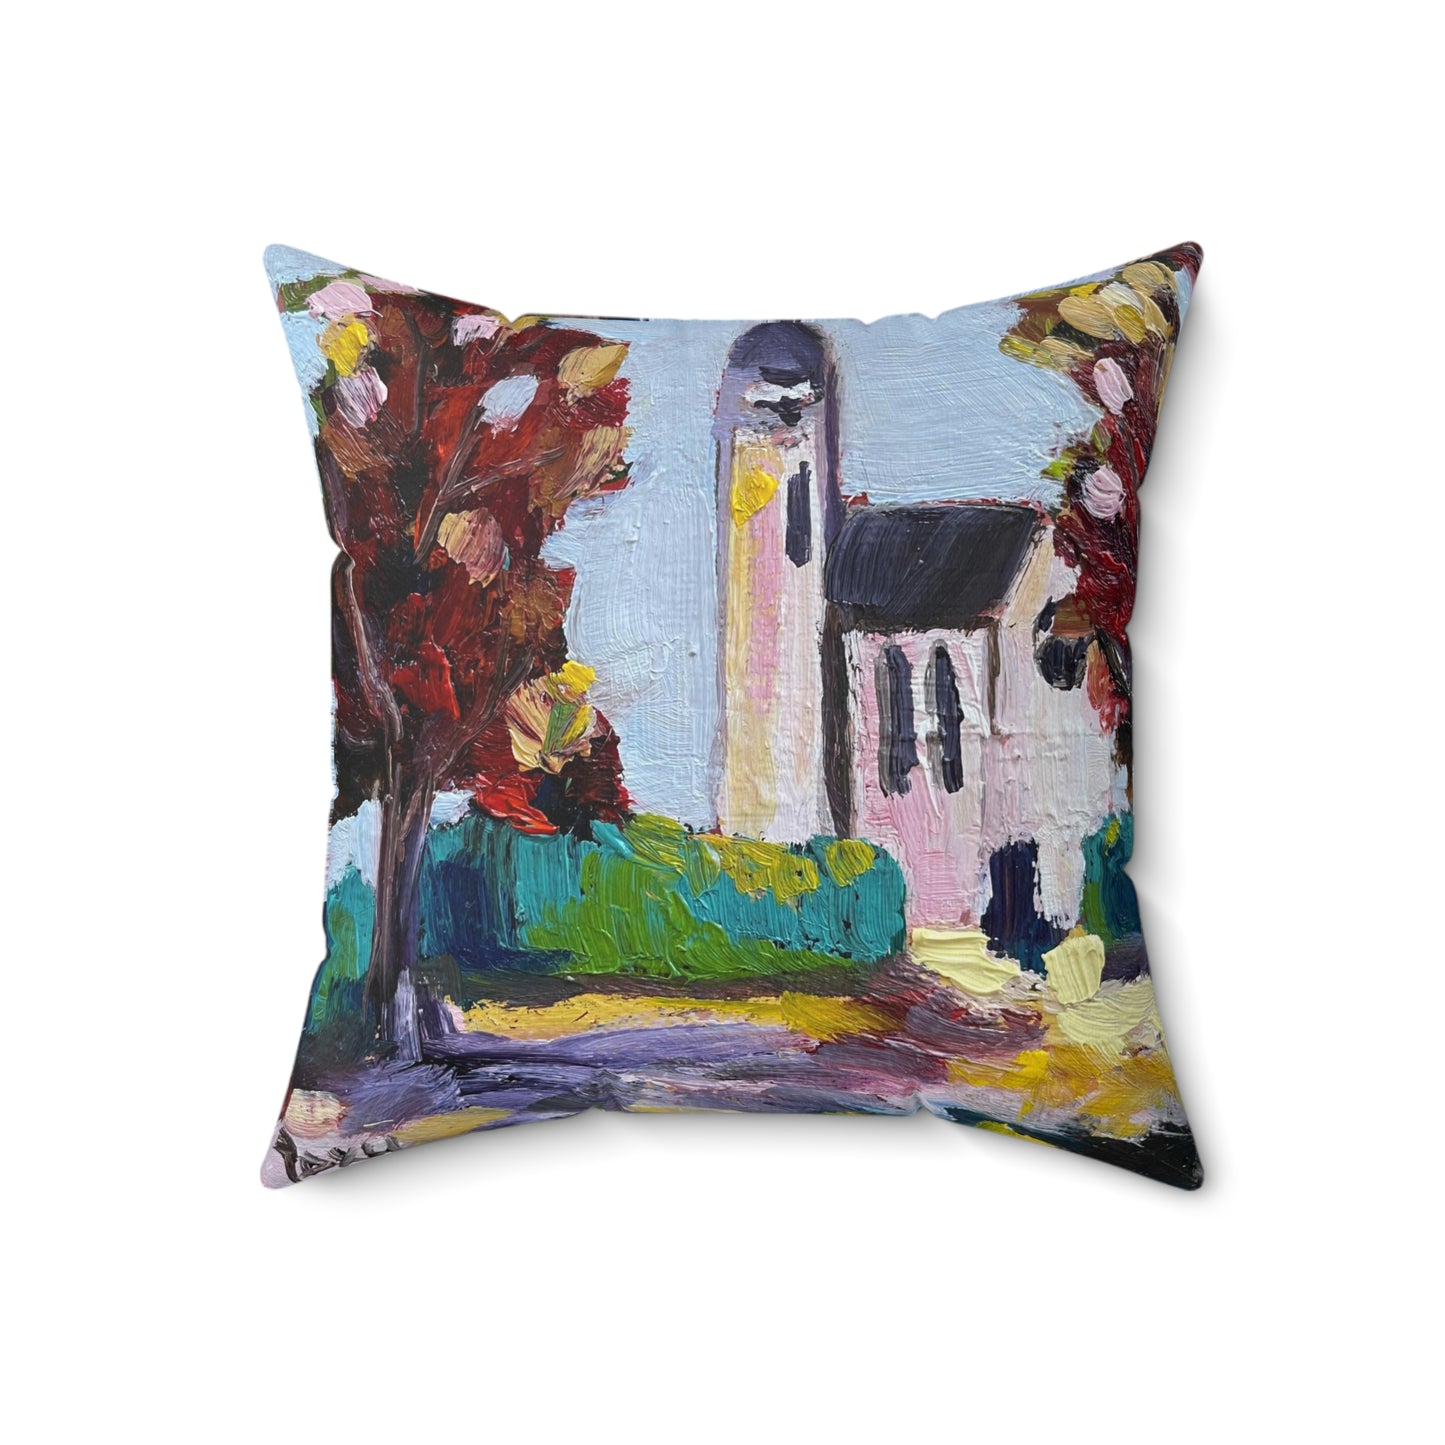 Church in a Field Indoor Spun Polyester Square Pillow